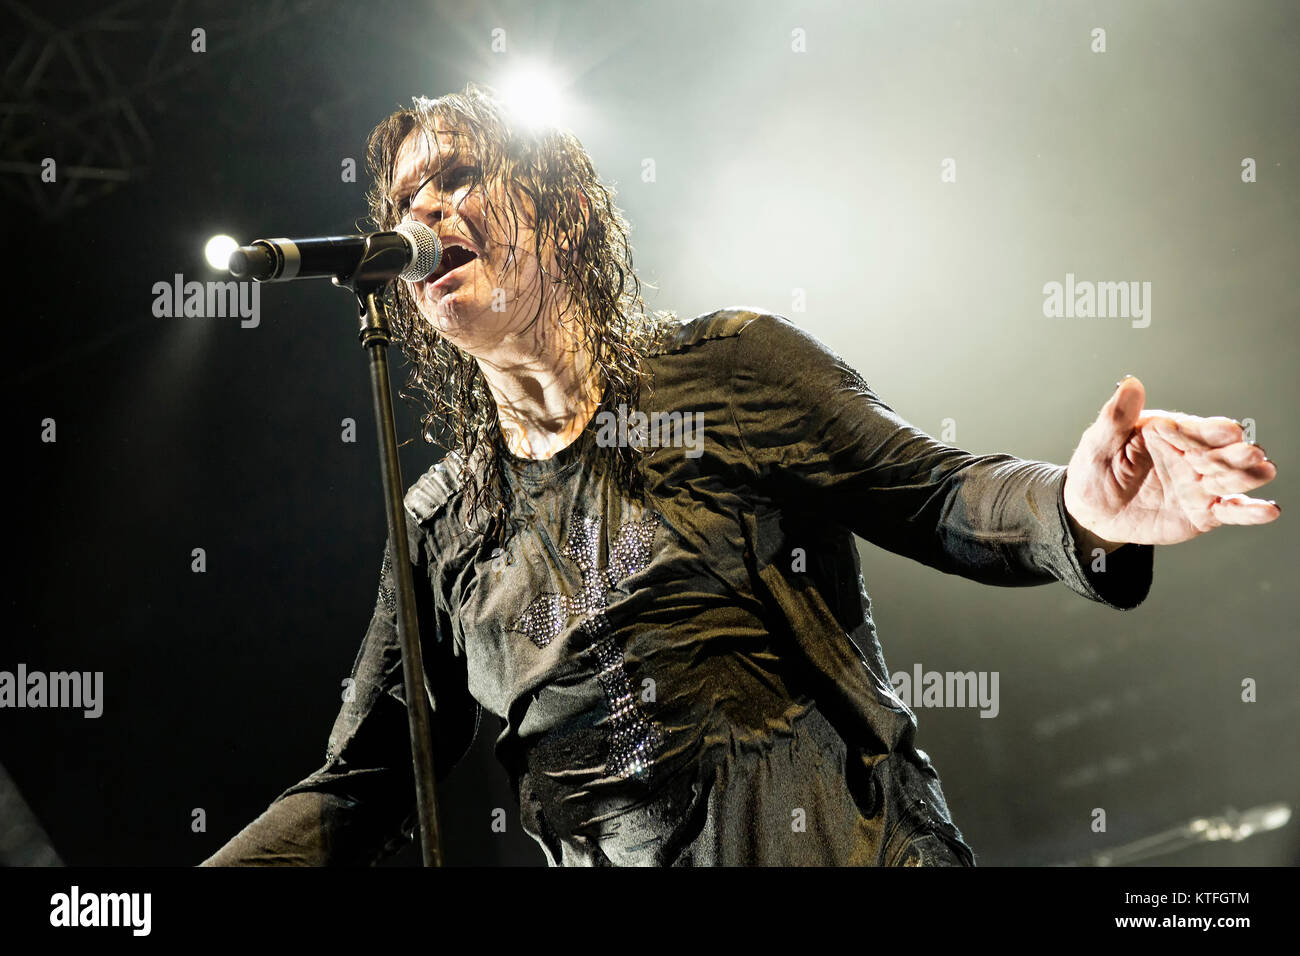 The English vocalist, songwriter and television personality Ozzy Osbourne performs a live concert at Oslo Spektrum as part of the “Ozzy and Friends tour” in 2012. Ozzy Osbourne is best known as the vocalist of the English rock band Black Sabbath. Norway, 31/05 2012. Stock Photo